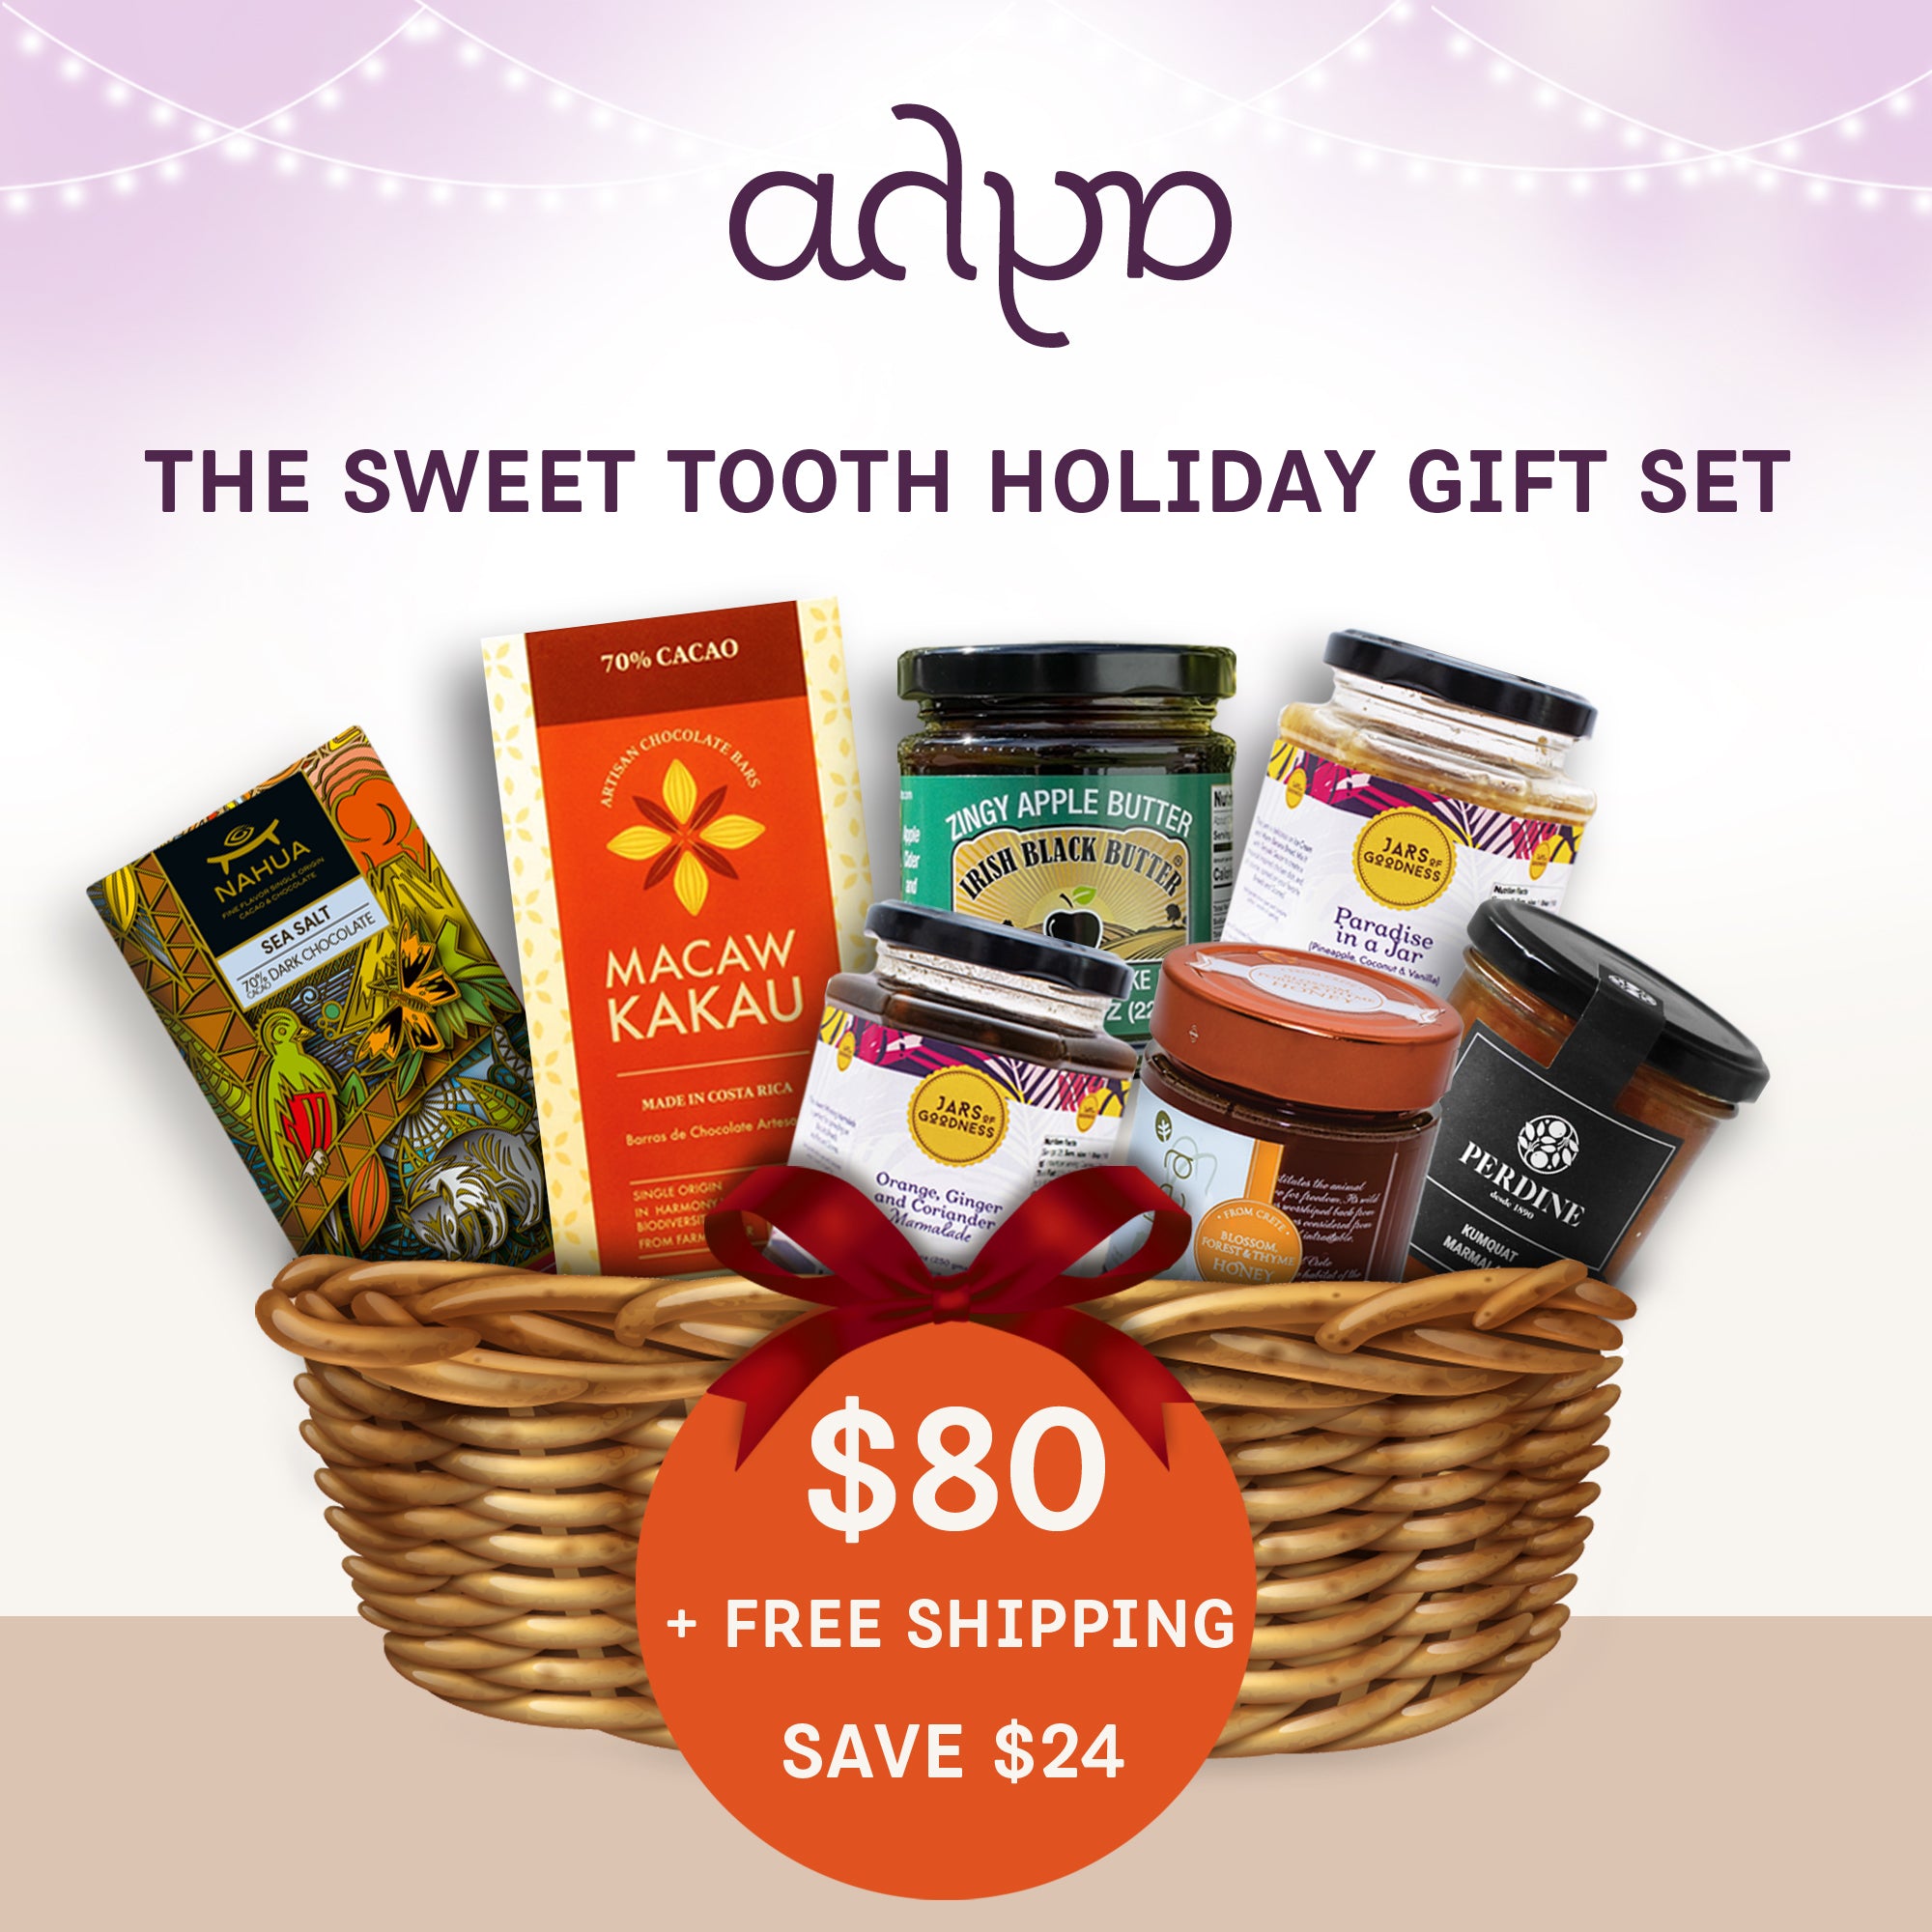 The Sweet Tooth Holiday Gift Set